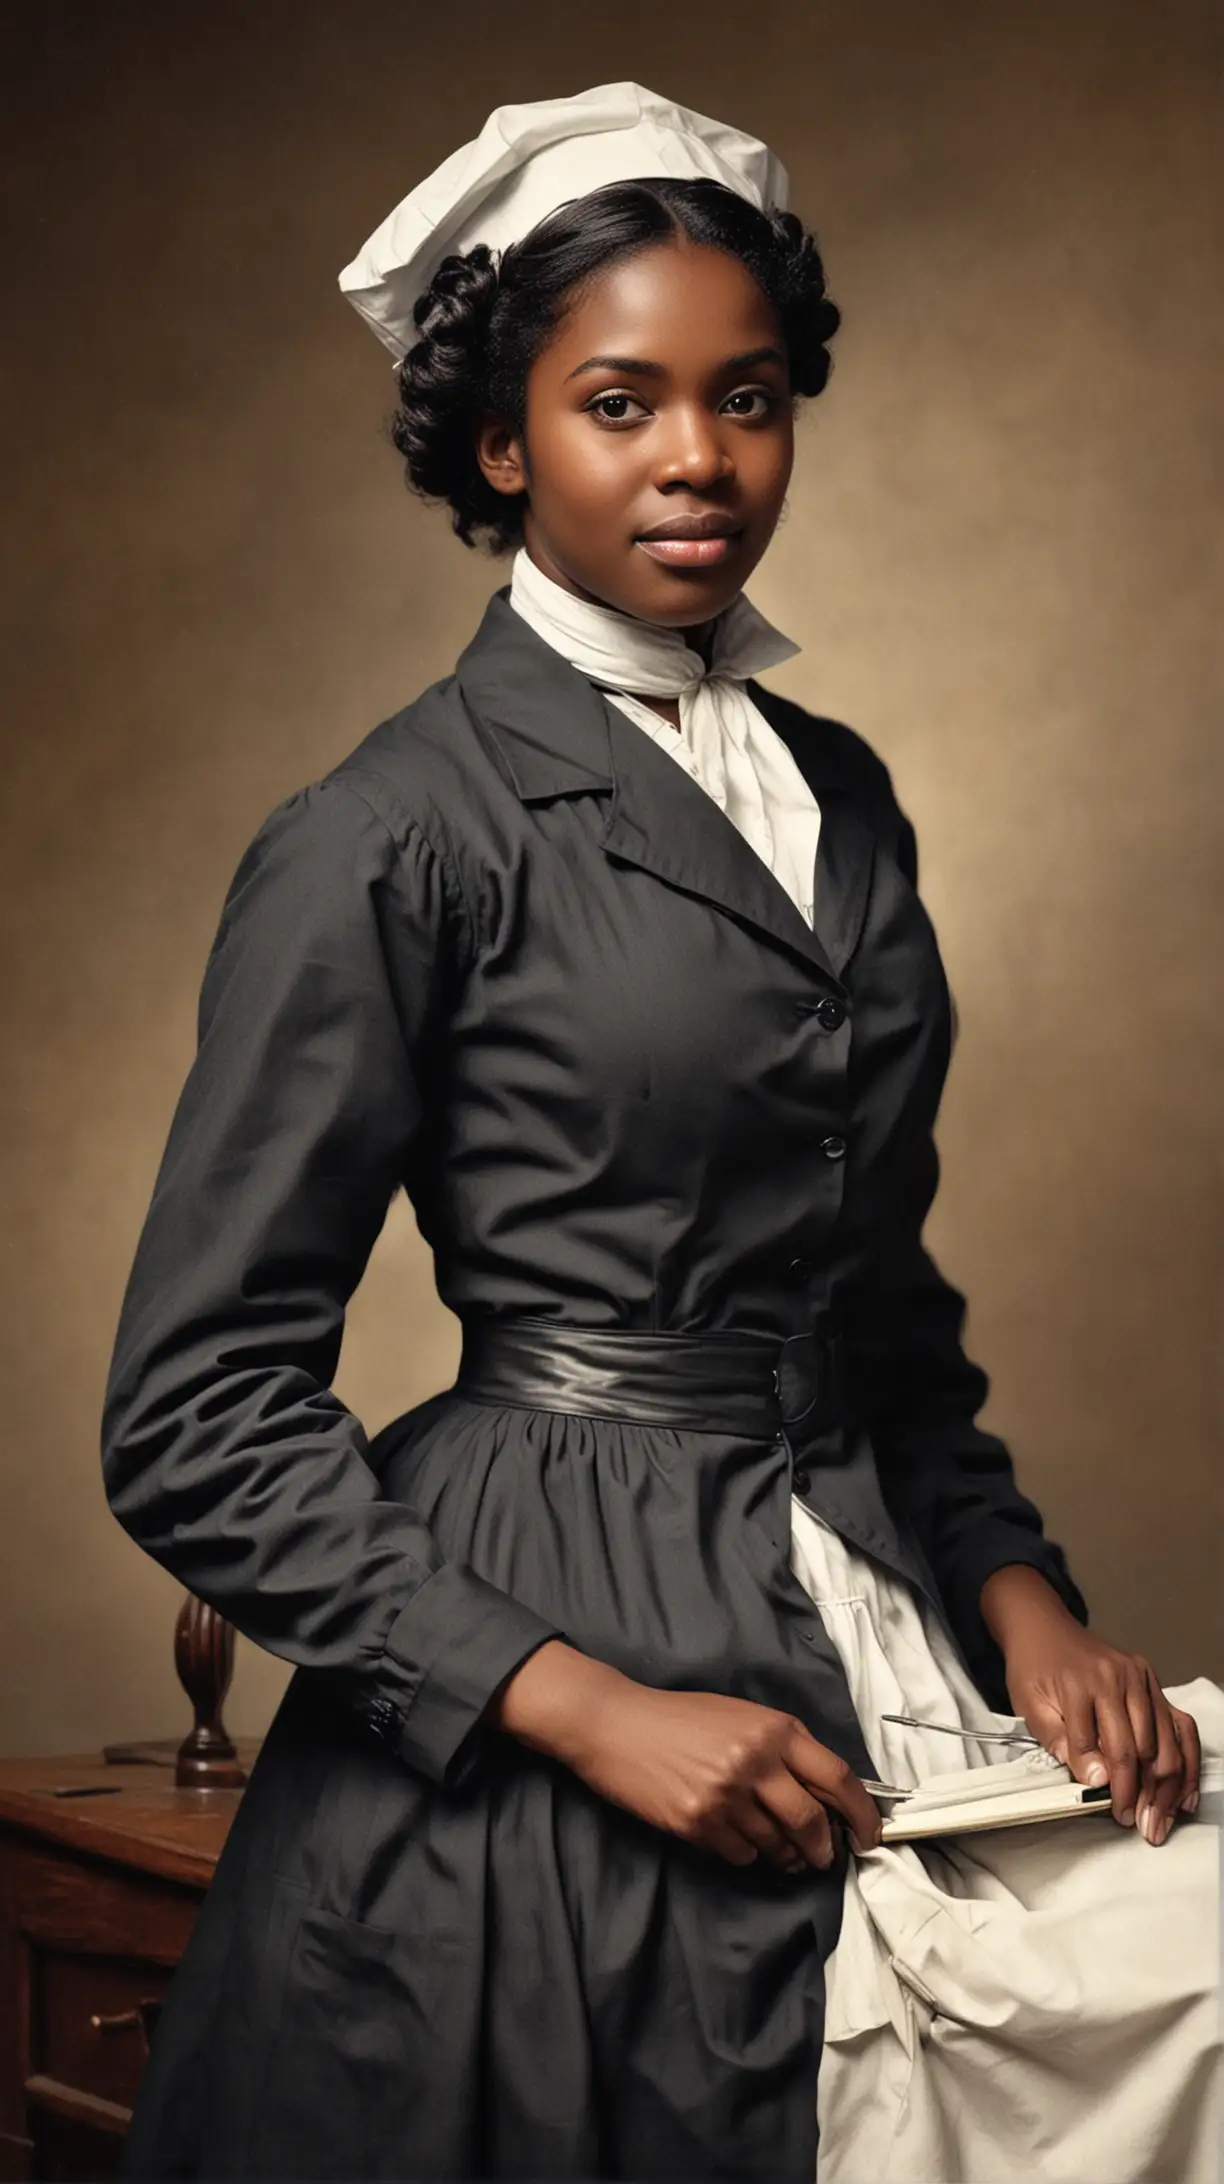 1865 Portrait of an Attractive Black Woman Physician and Nurse